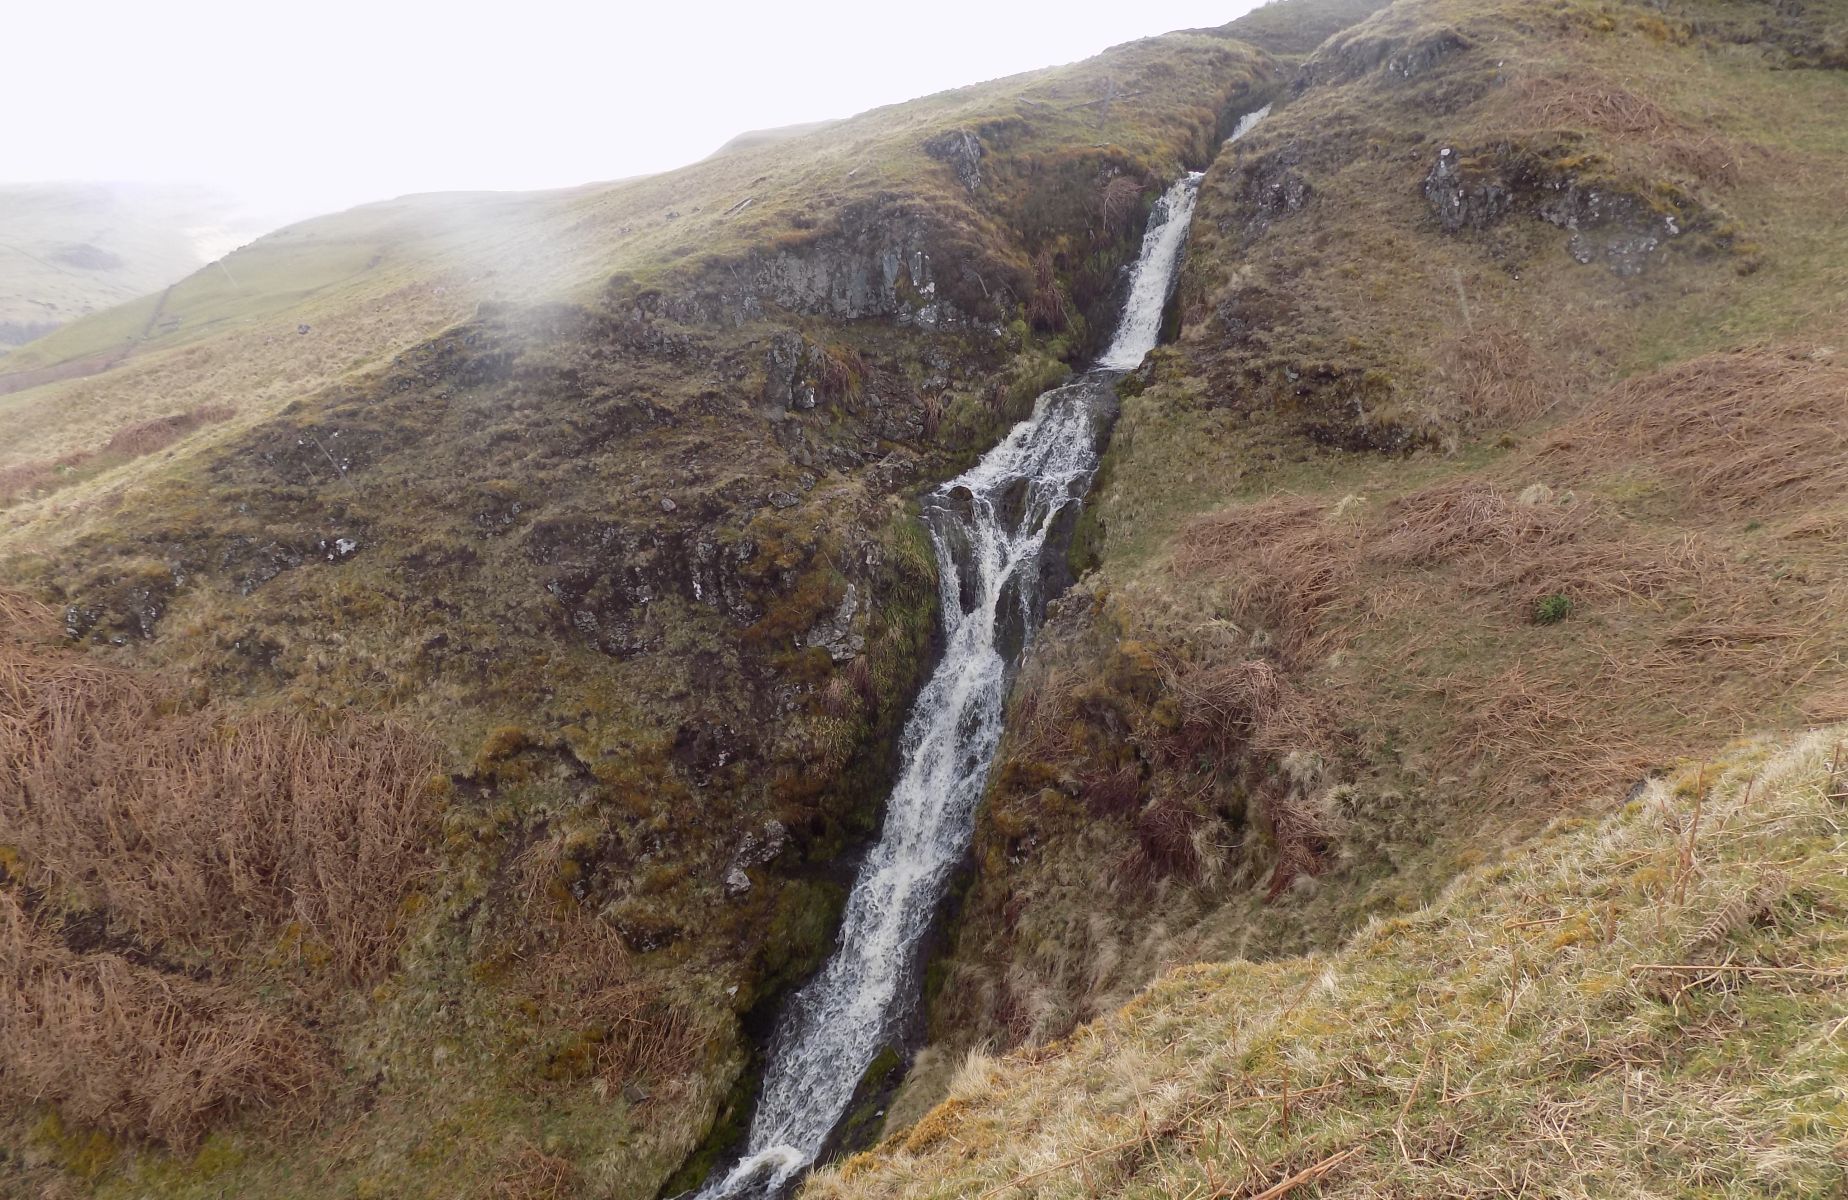 Waterfall on Balmenoch Burn in Fintry Hills on route to Double Craigs